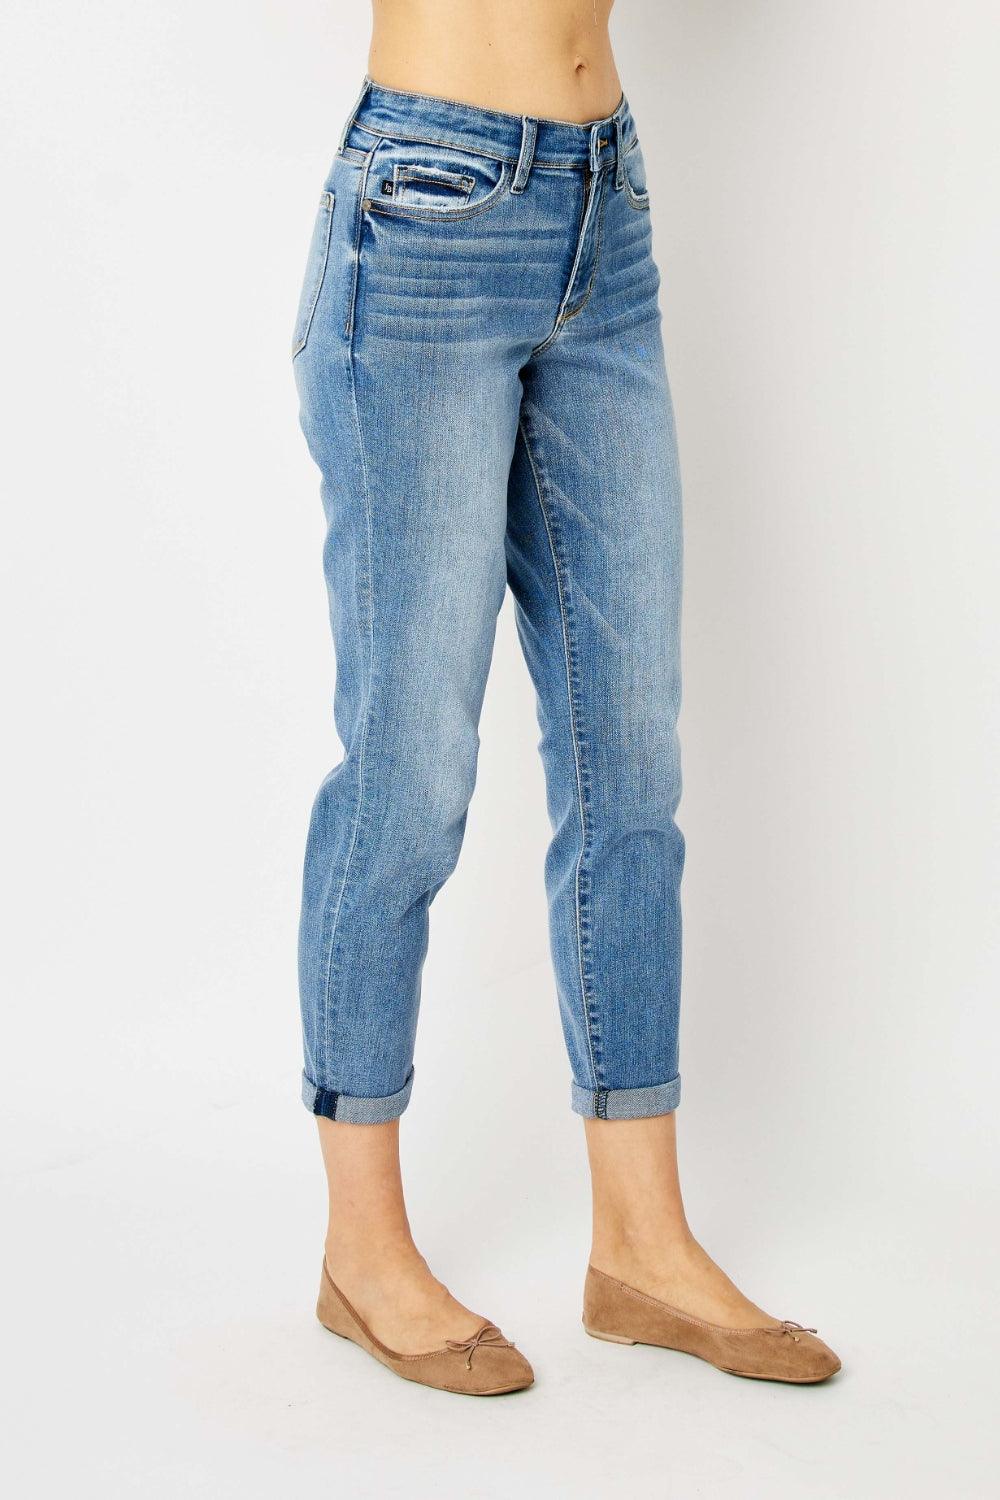 Judy Blue Full Size Cuffed Hem Slim Jeans - God's Girl Gifts And Apparel